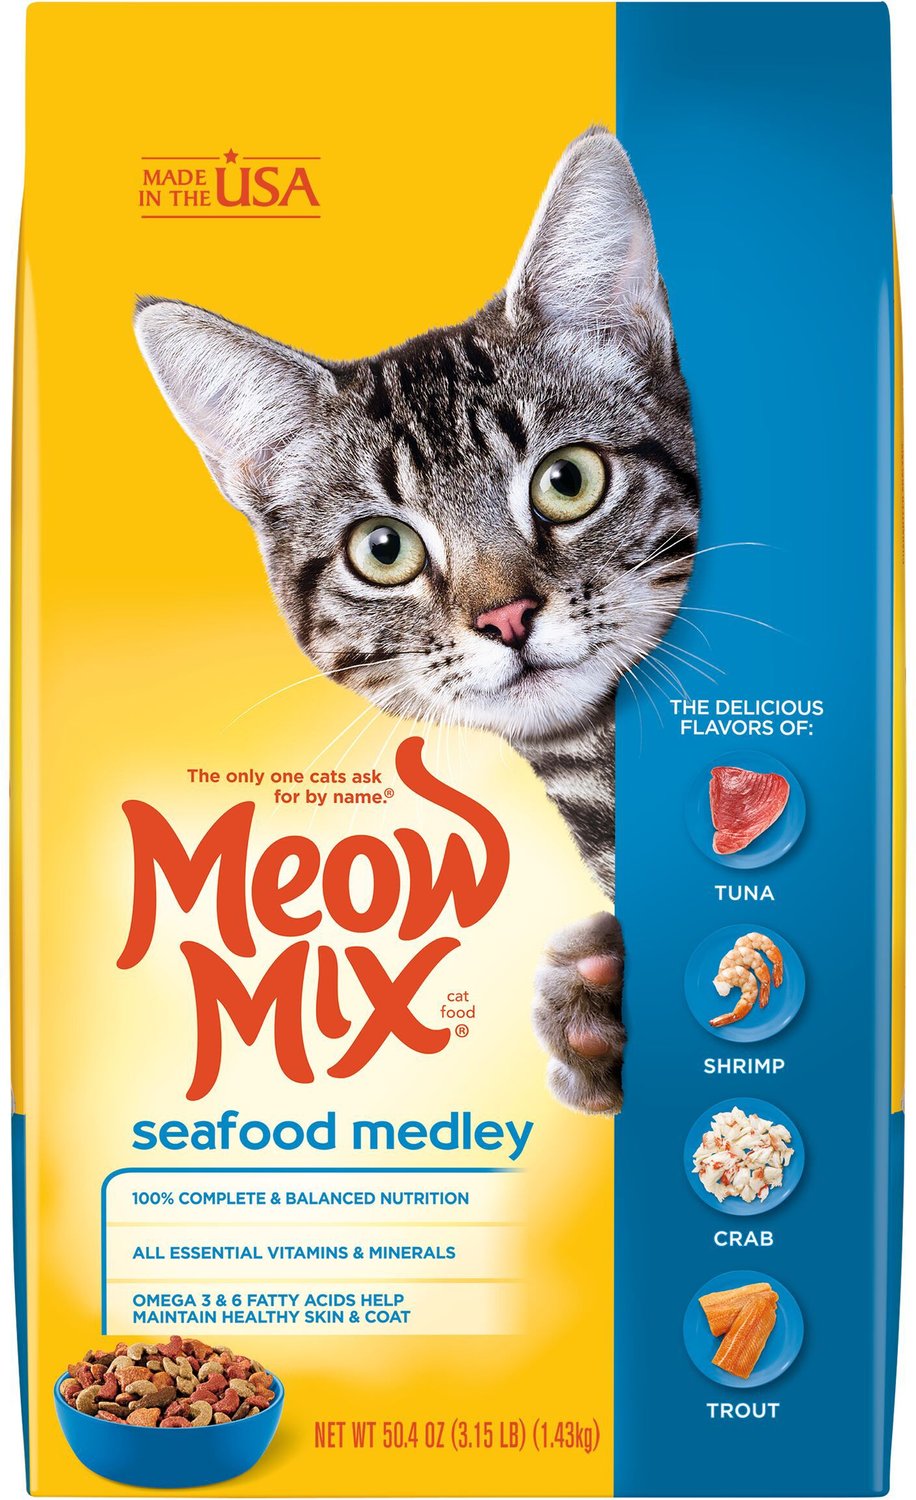 MEOW MIX Seafood Medley Dry Cat Food, 3 